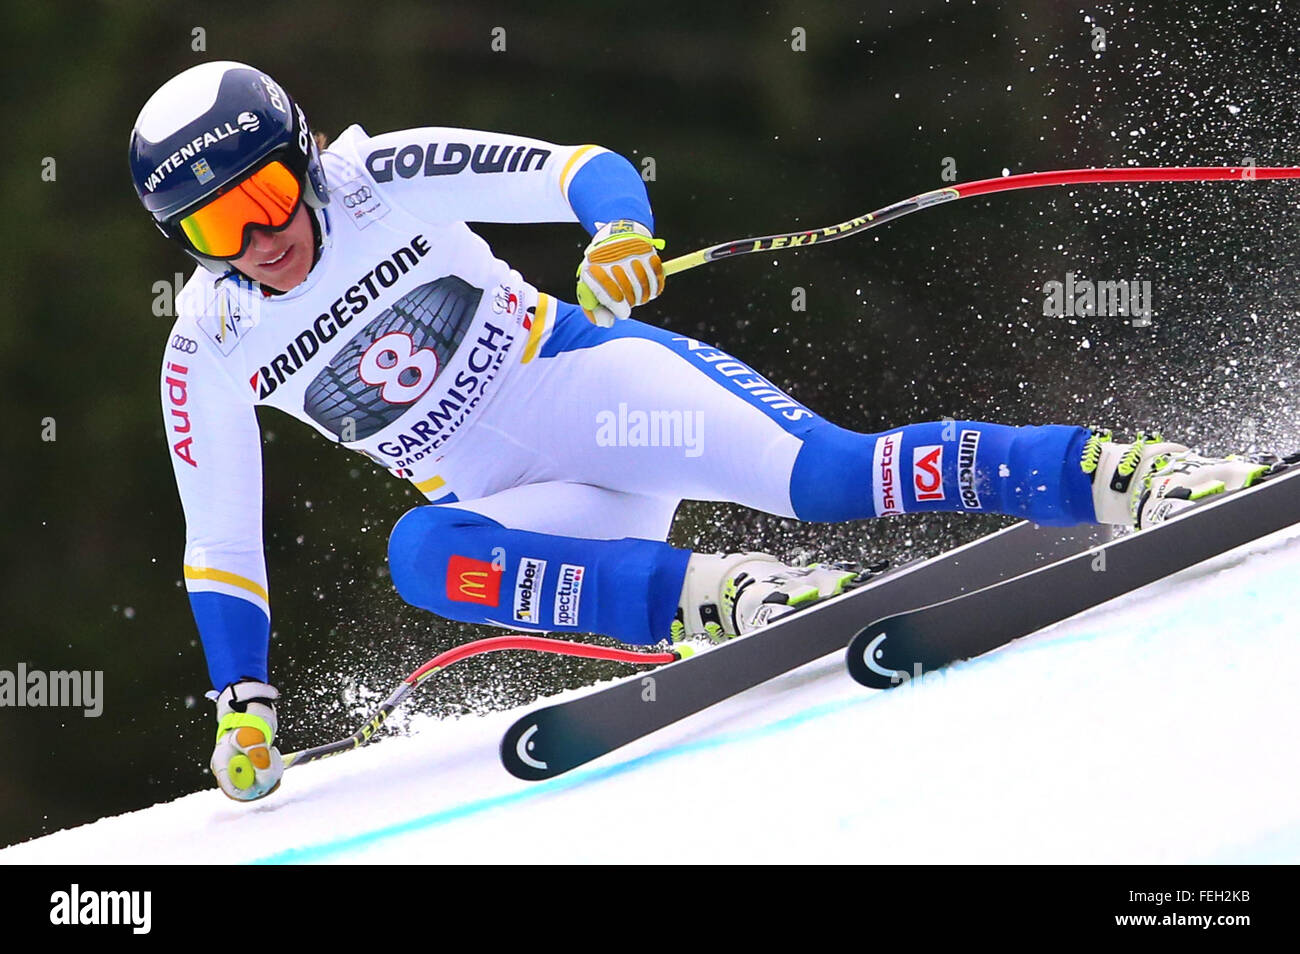 Garmisch-Partenkirchen, Germany. 07th Feb, 2016. Sweden's Kajsa Kling in action during the women's Super G race of the Alpine Skiing World Cup in Garmisch-Partenkirchen, Germany, 07 February 2016. Photo: KARL-JOSEF HILDENBRAND/dpa/Alamy Live News Stock Photo